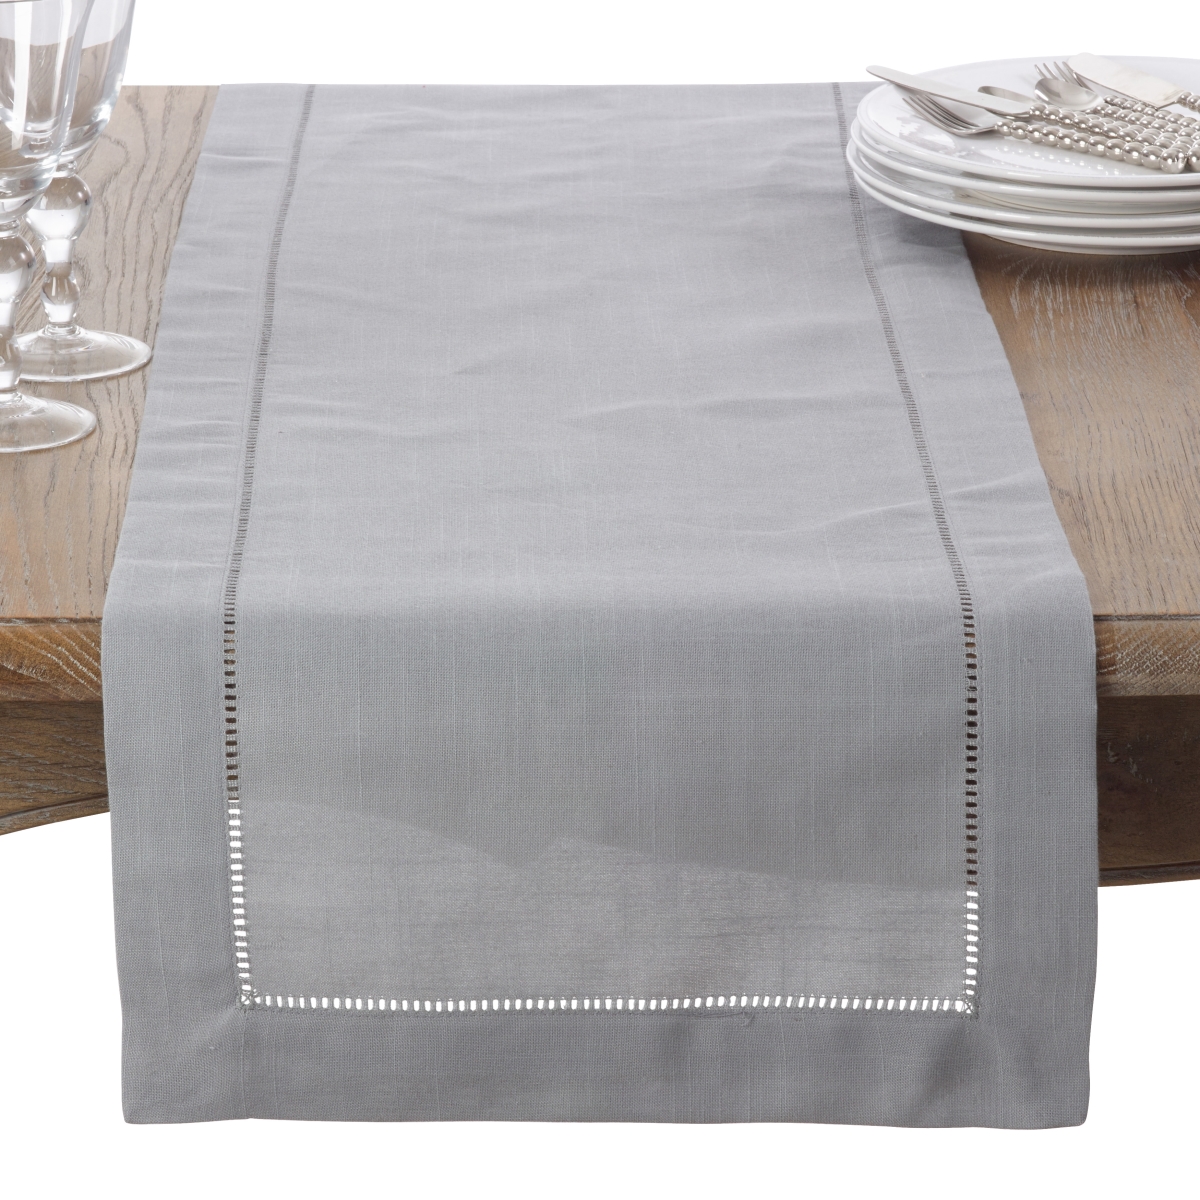 SARO LIFESTYLE 6302.GY16120B 16 x 120 in. Rochester Collection Table Runner with Hemstitched Border, Gray